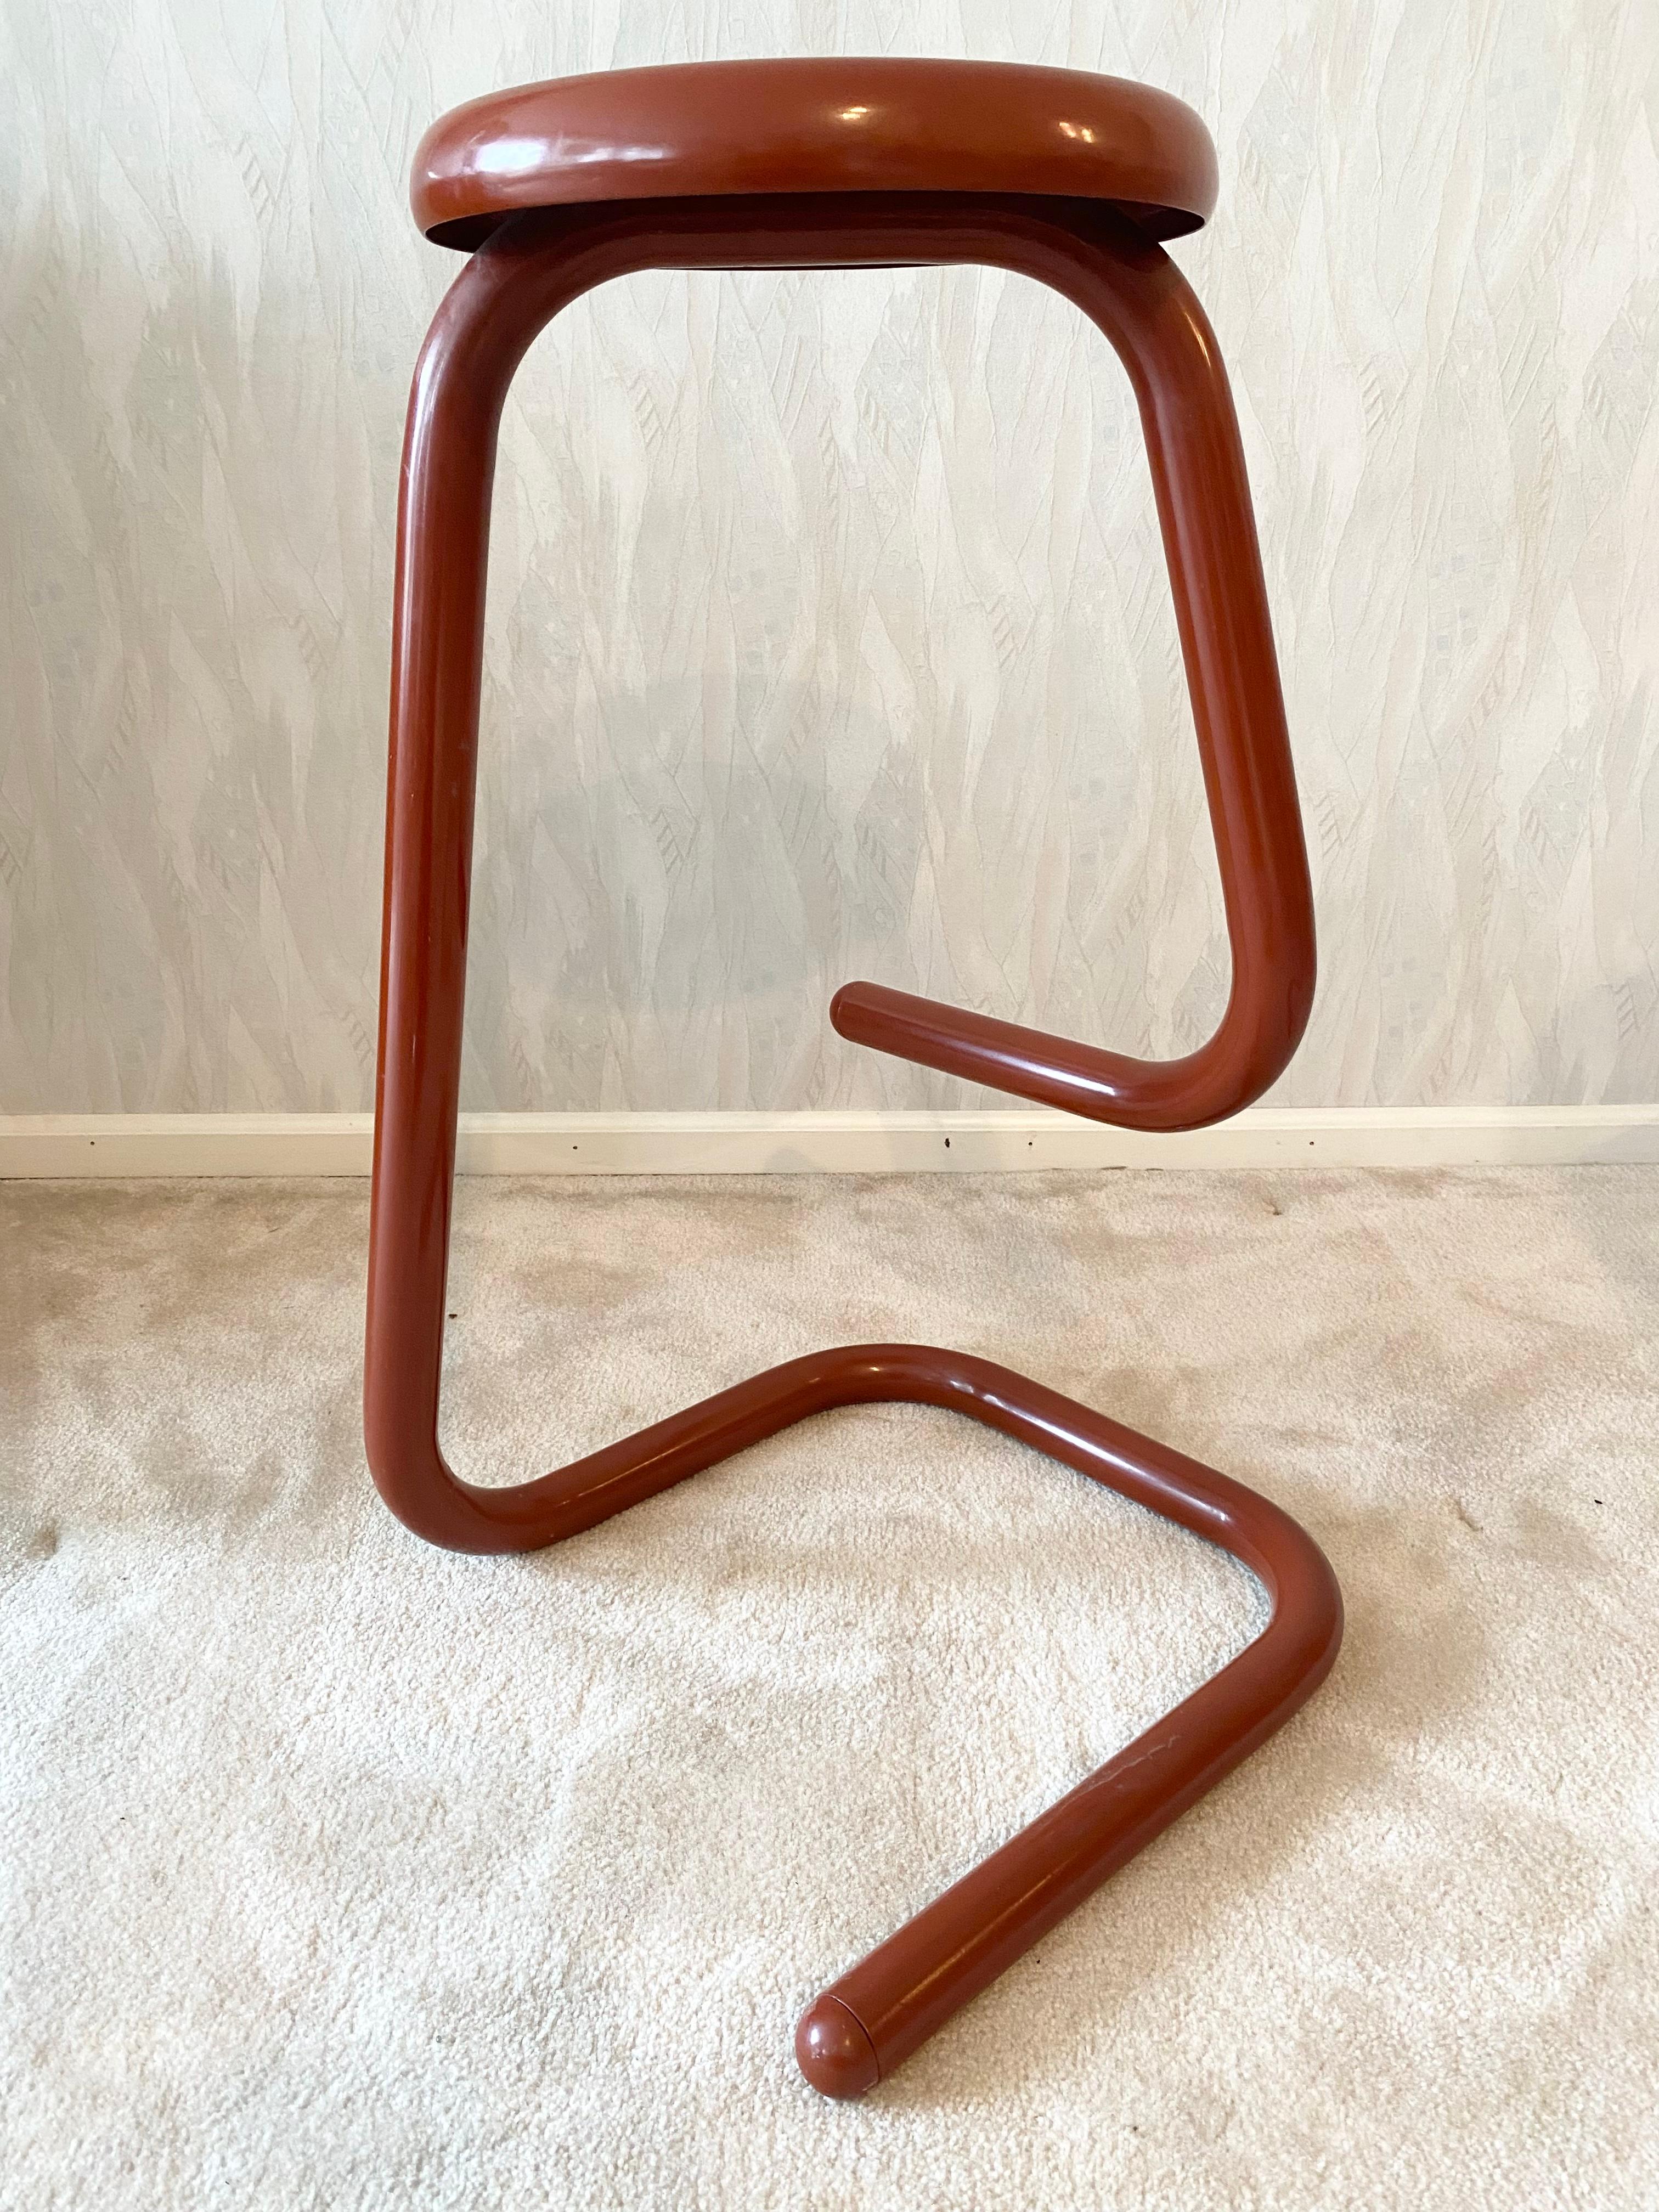 Post-Modern Near Perfect Pair of Red Vintage 1980s K700 Paperclip Stools by Kinetics